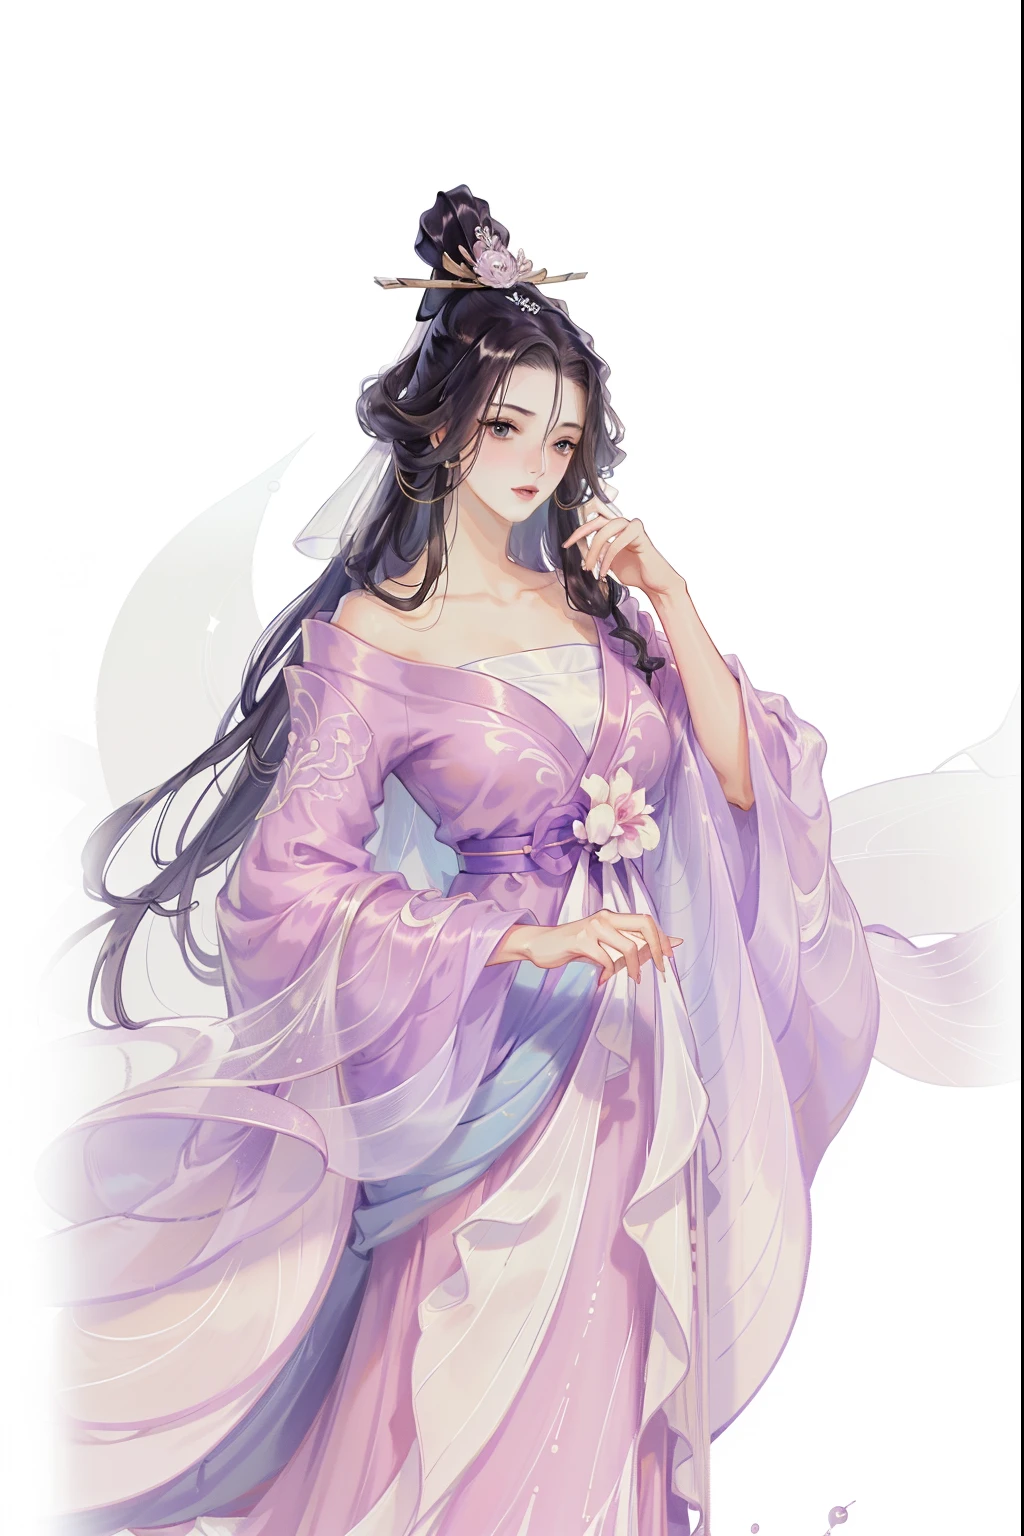 (((tmasterpiece, Best quality at best, Ultra-high resolution, CG unified 8K wallpaper, Best quality, ultra - detailed, ultra HD picture quality))), 1 girl, cabelos preto e longos, game fairy, Pink clothes, Hanfu, yarn, flowing gauze, jewely, ((Colorful)), Nice face, beautidful eyes, Beautiful hairstyle, Beautiful costumes, Structurally sound